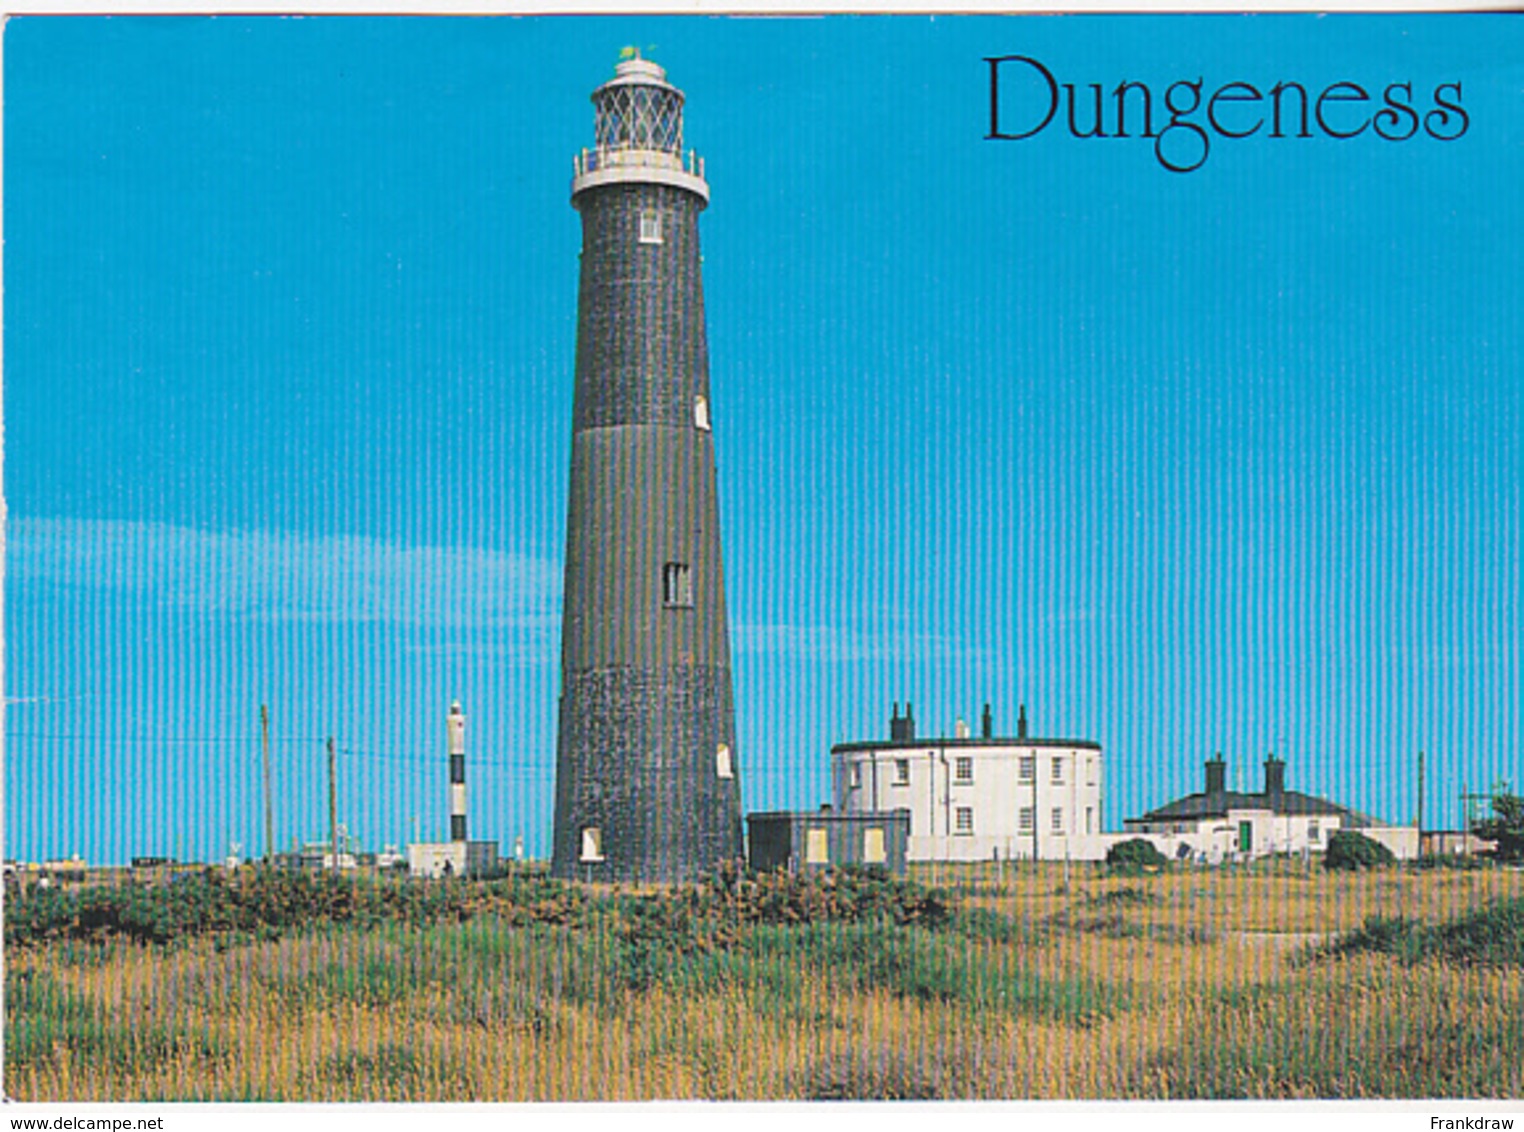 Postcard - The Old Lighthouse, Dungeness - Erected 1904 - Card No. 2.64.17-11 - VG - Unclassified